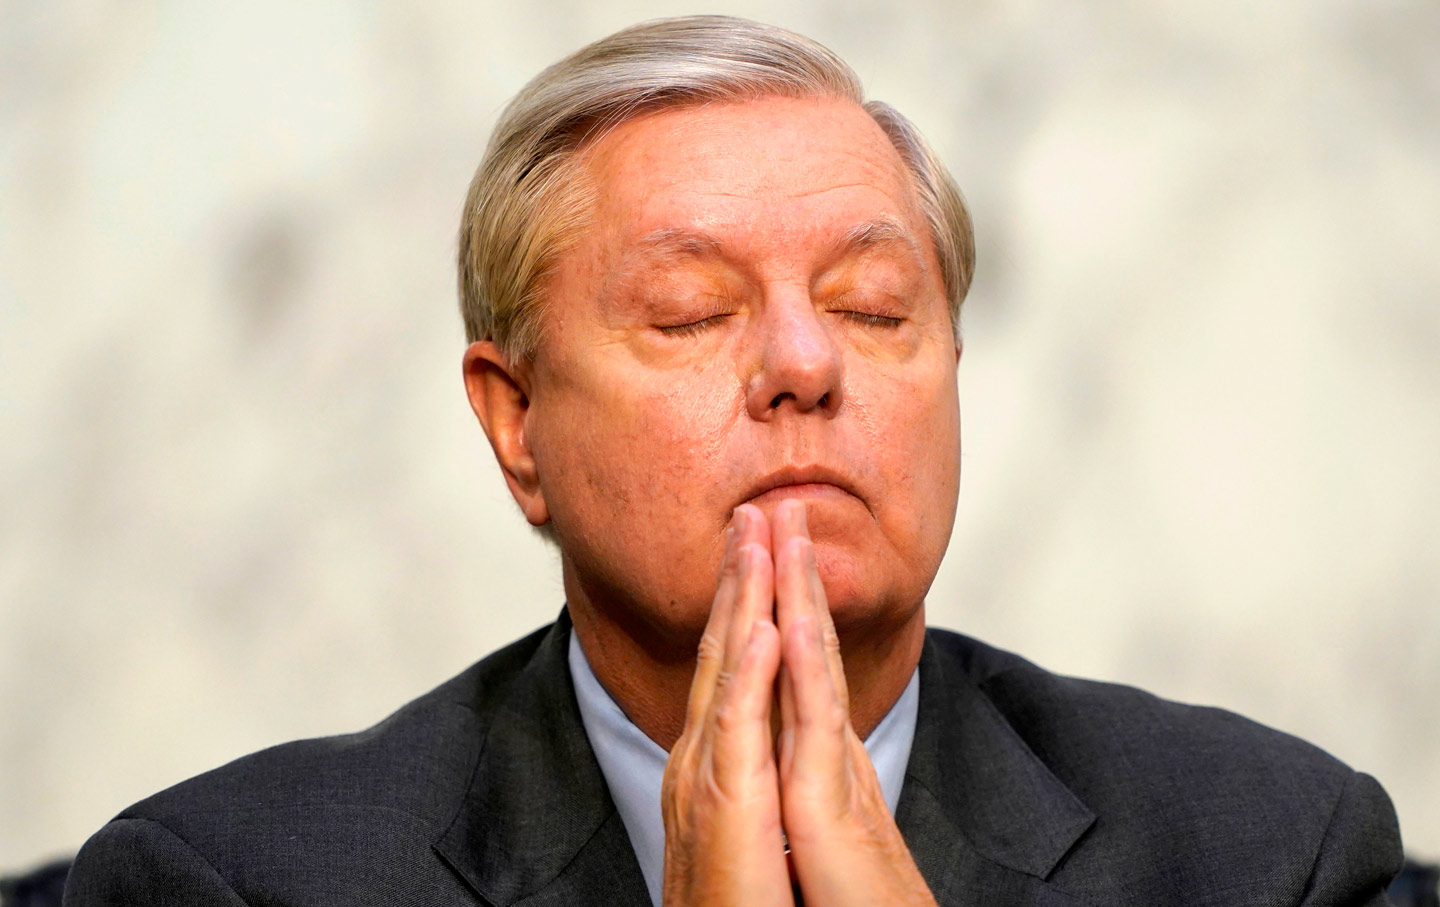 Lindsey Graham Just ‘Committed a Crime in Plain Sight’